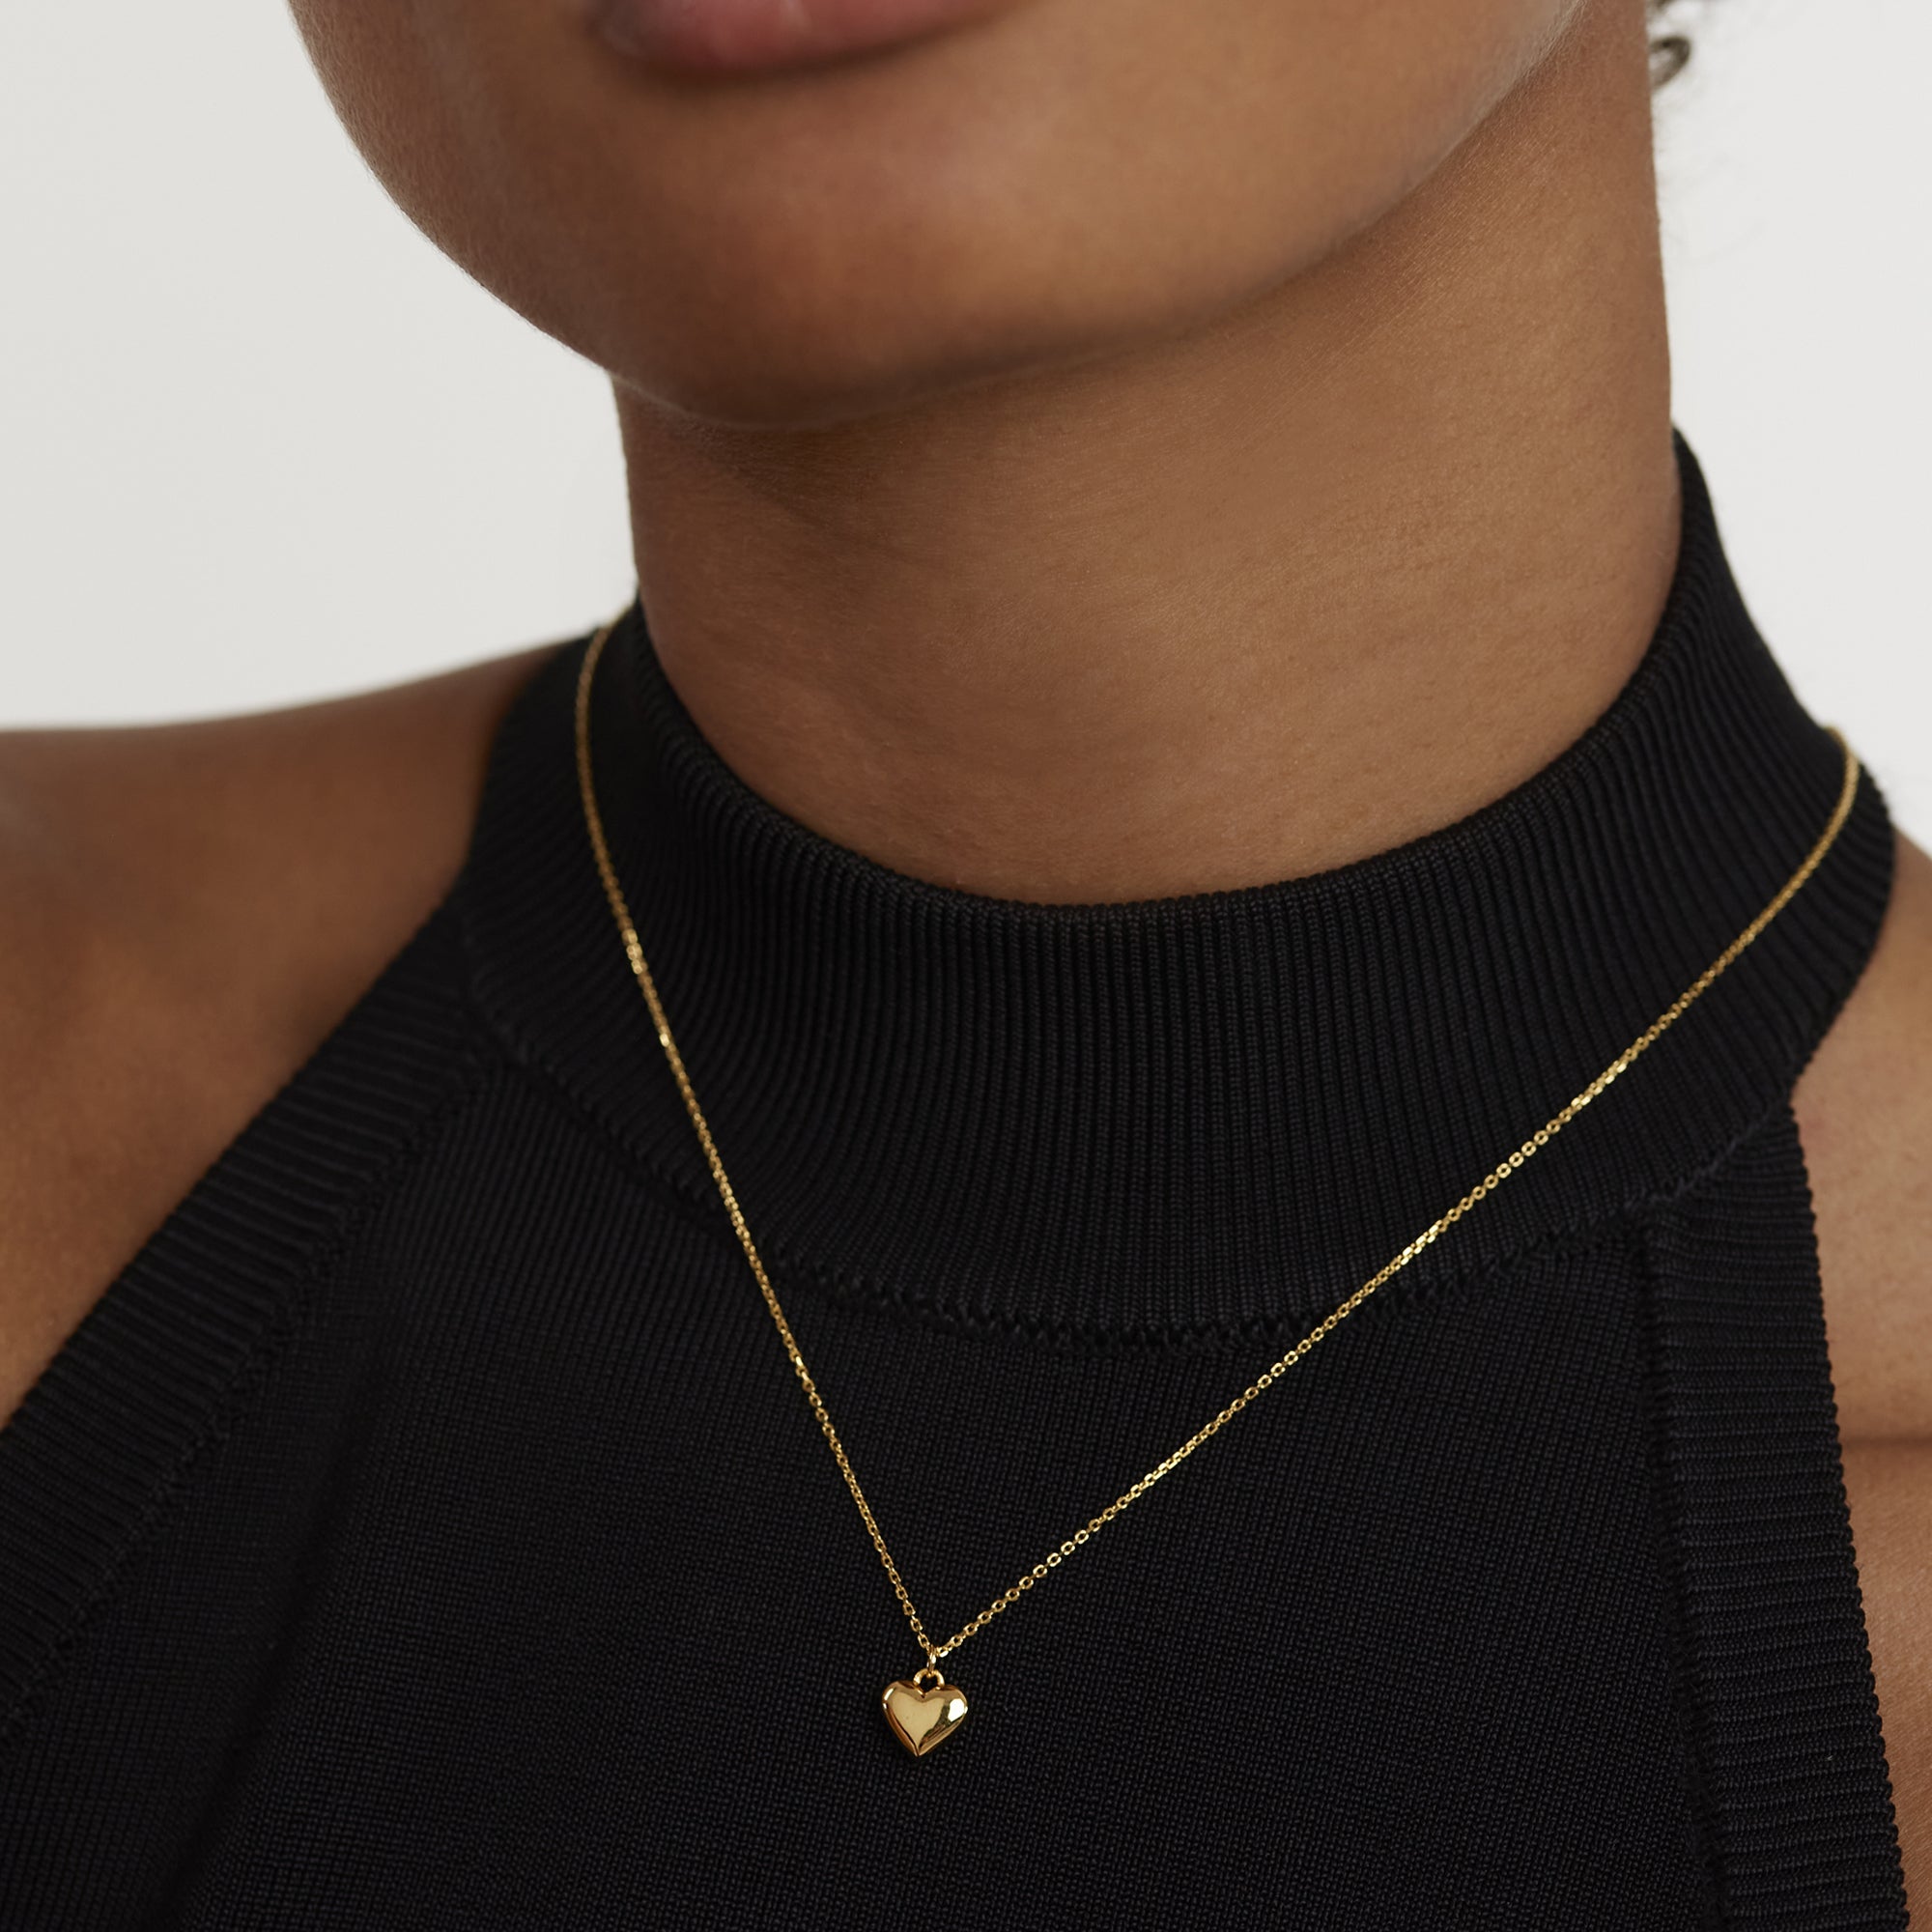 L'Absolu Gold Necklace